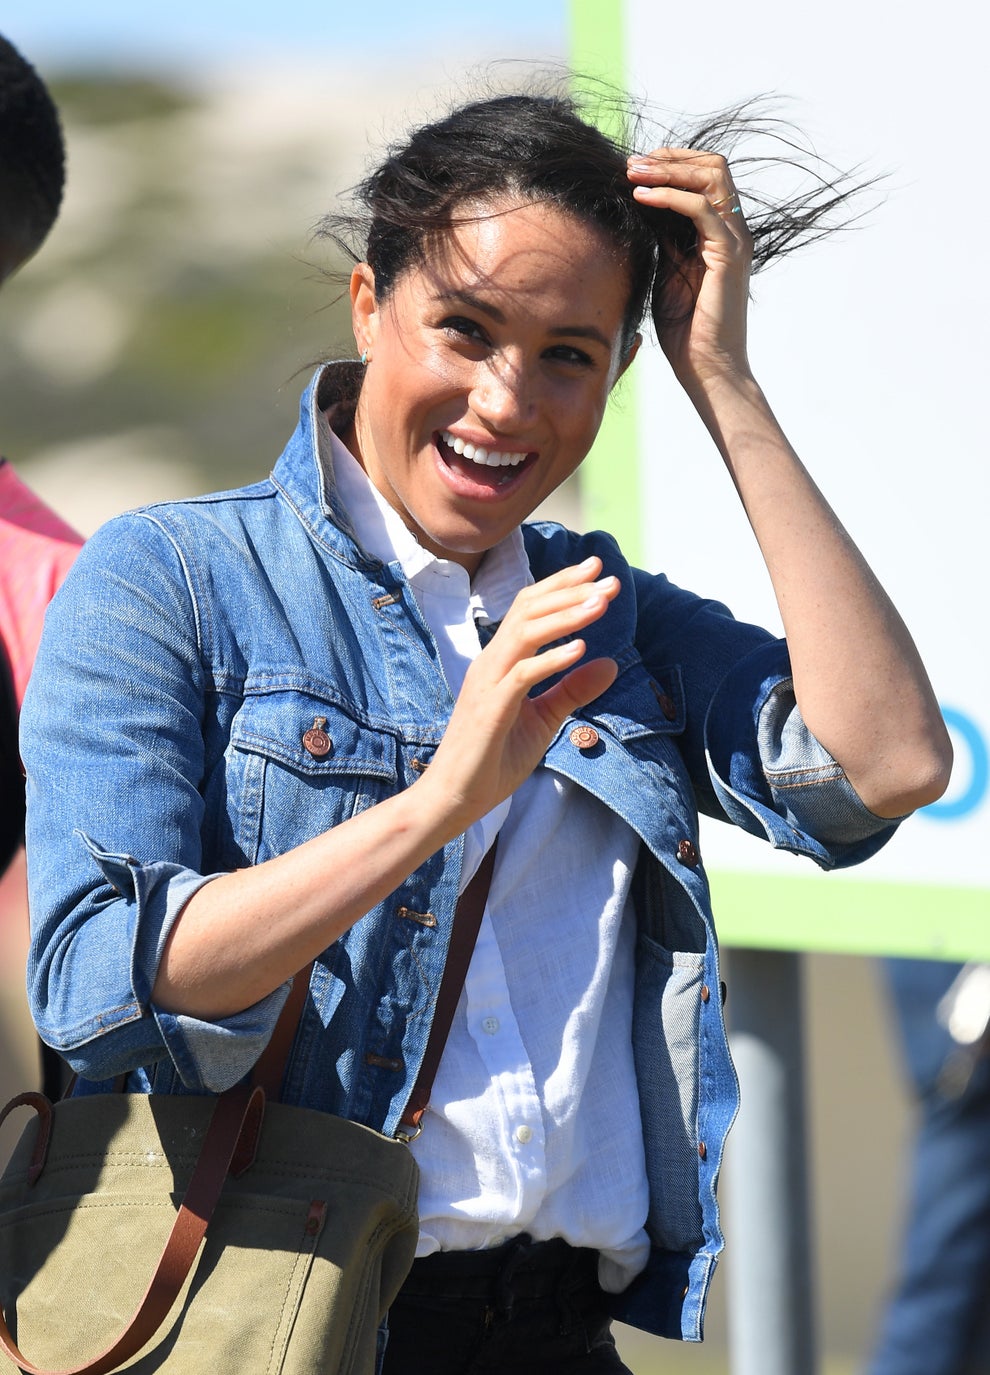 Meghan Markle Wears A Historic Denim Jacket On Royal Tour In Cape Town